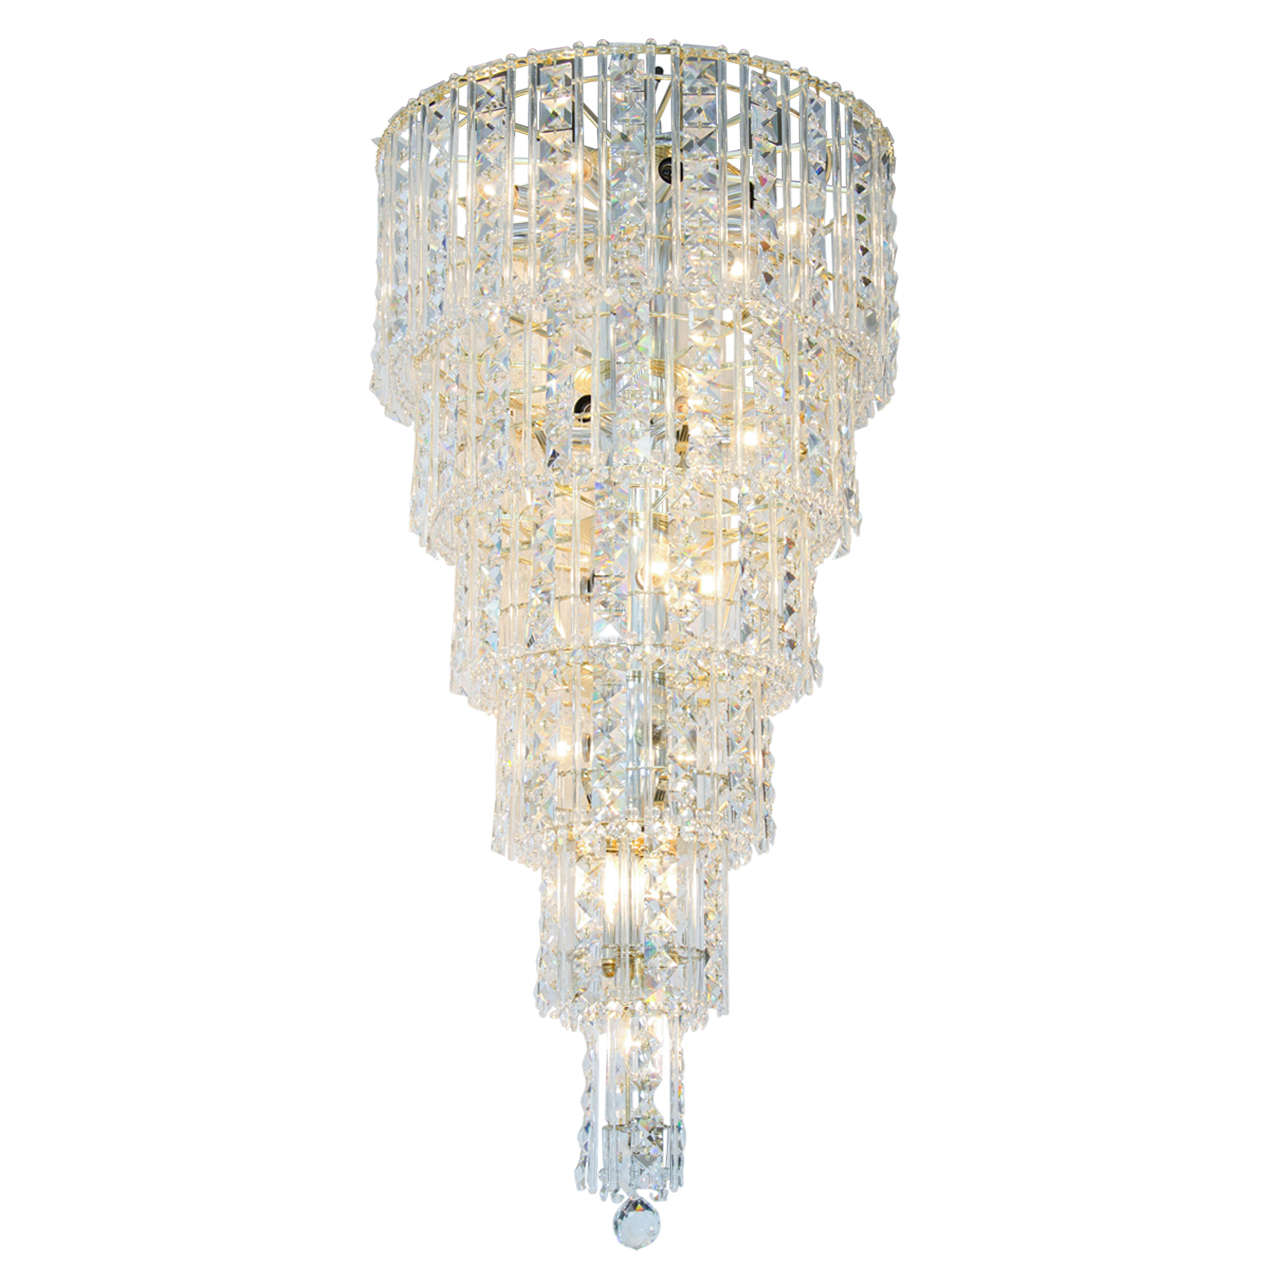 Midcentury SixTier Chandelier with Austrian Crystals For Sale at 